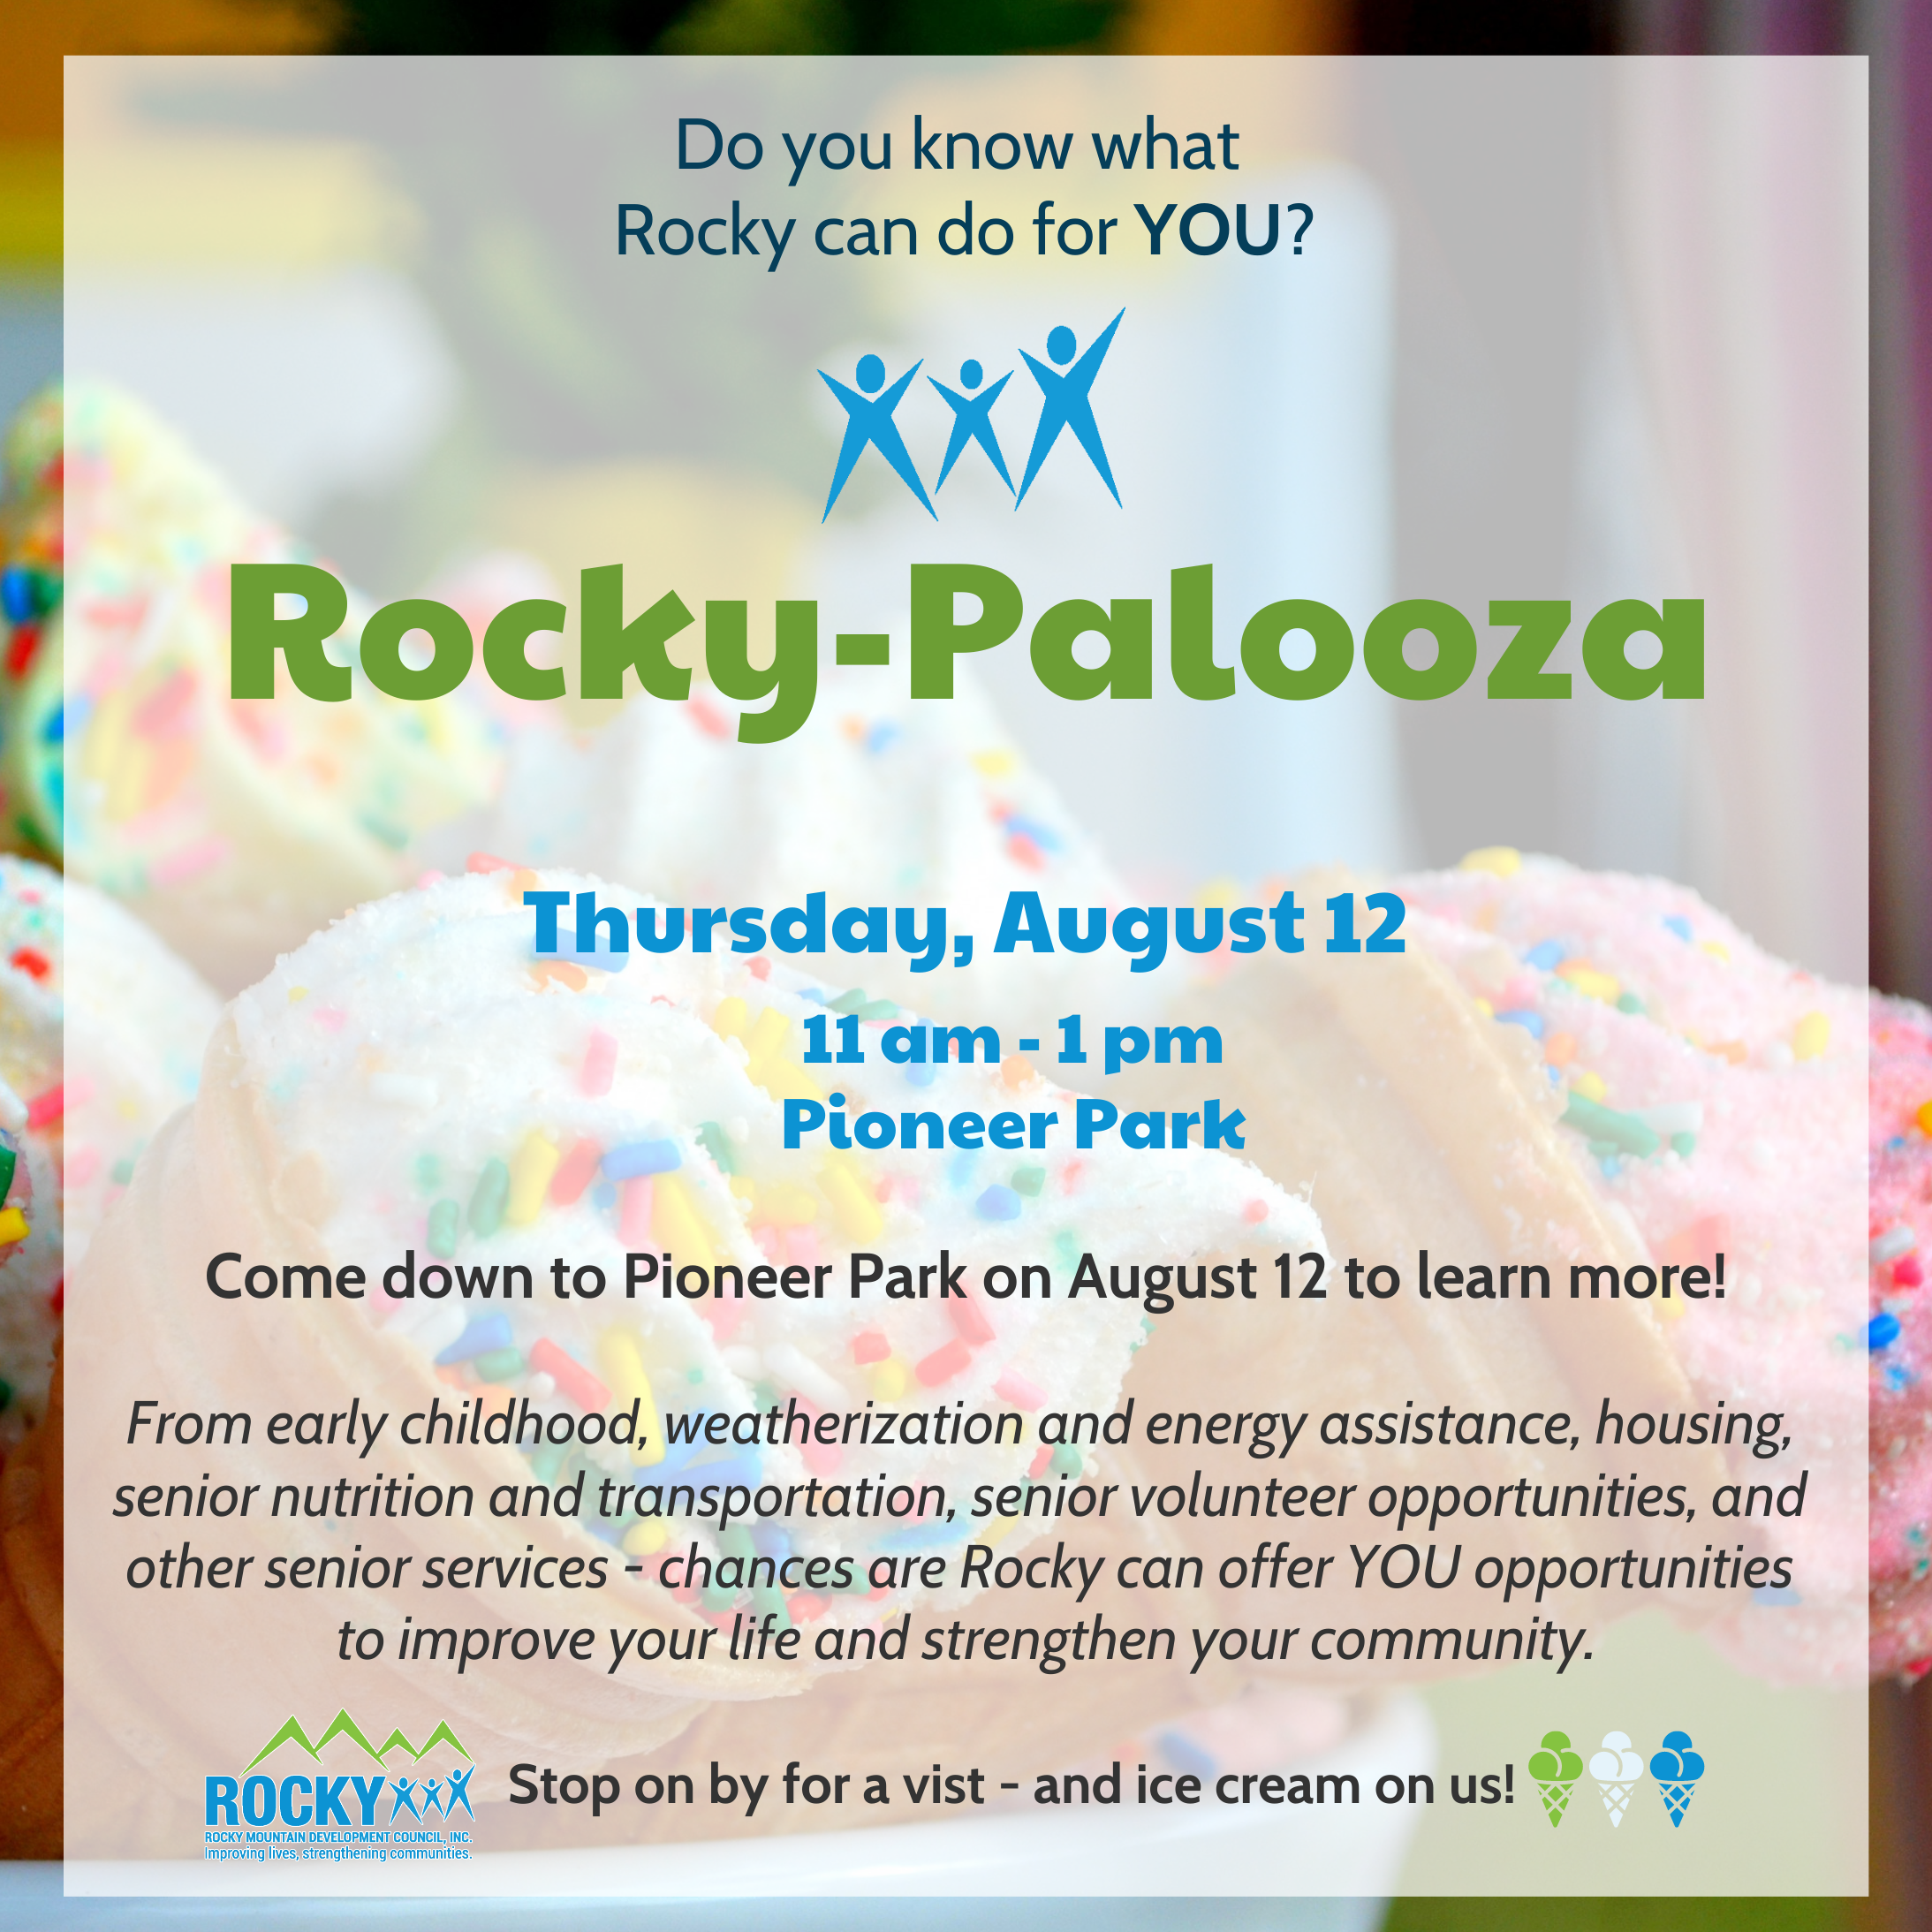 Join us at Pioneer Park on Thursday, August 12 from 11 am - 1 pm.  Stop by to enjoy ice cream and chat with us about how Rocky can serve you!